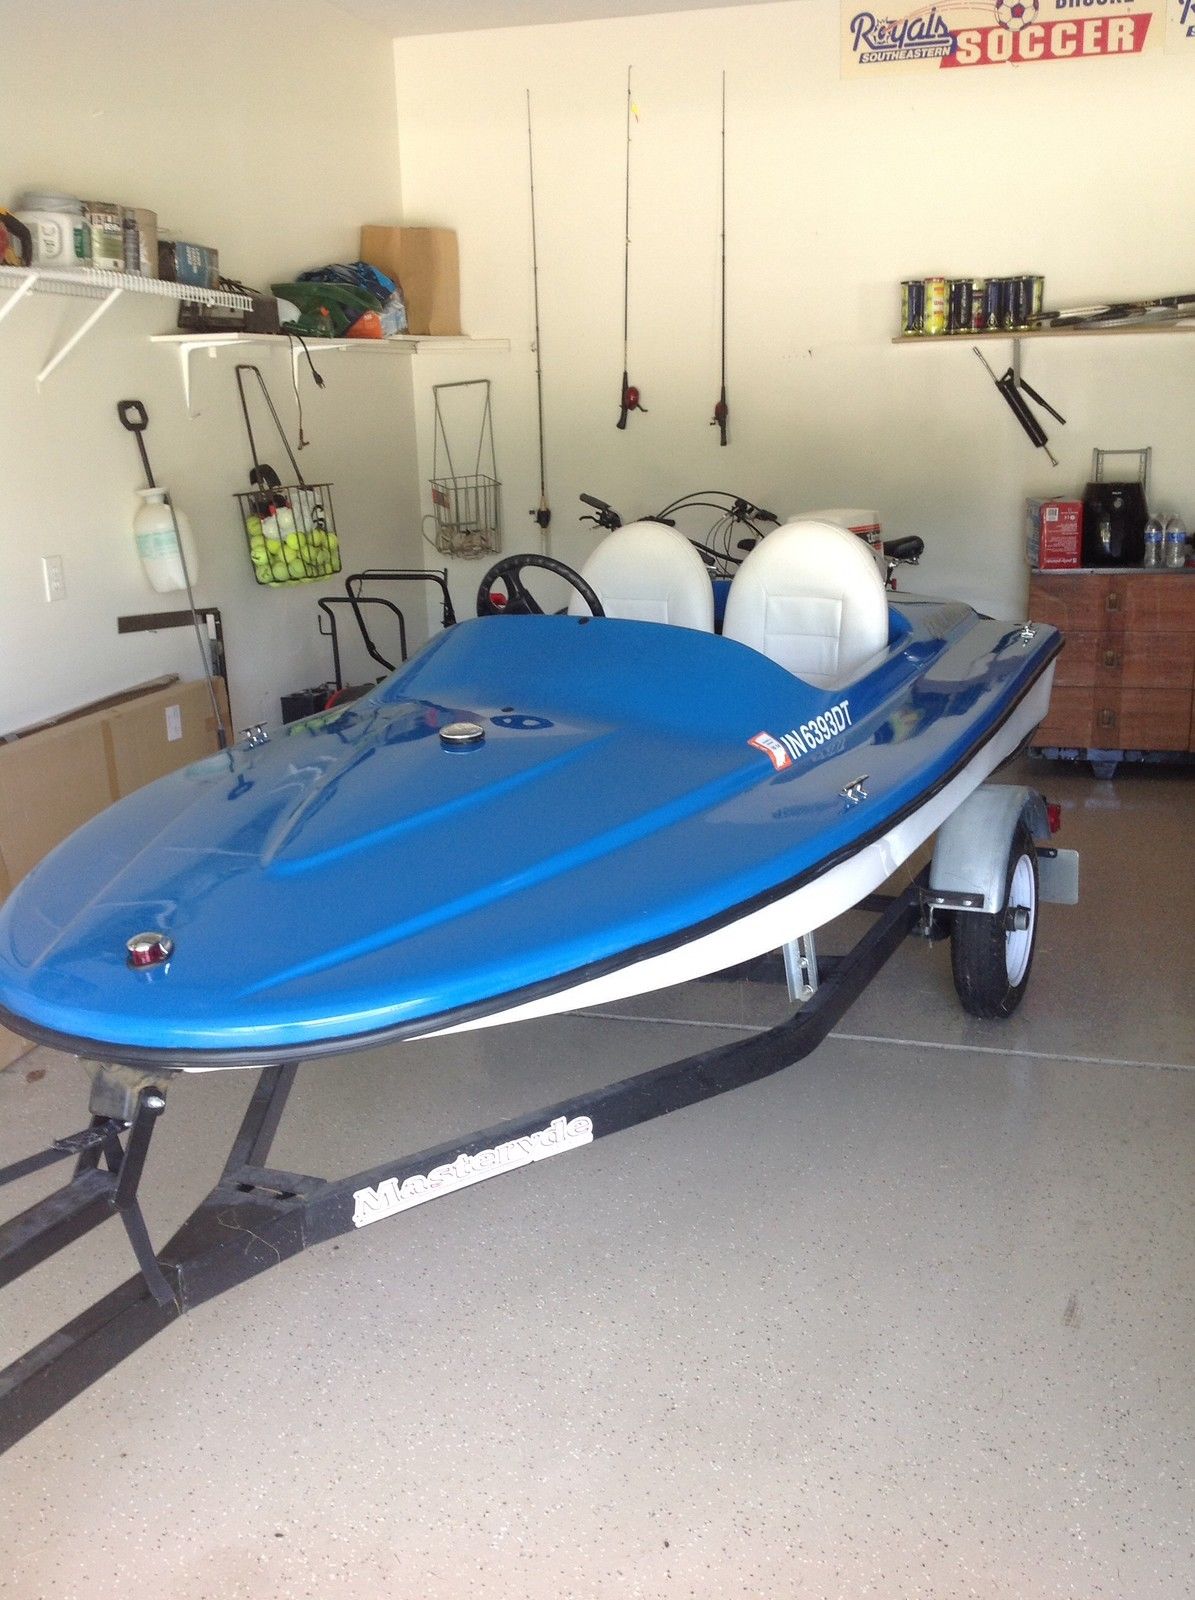 Exhilarator 101b Mini Speed Boat 2011 for sale for $3,000 